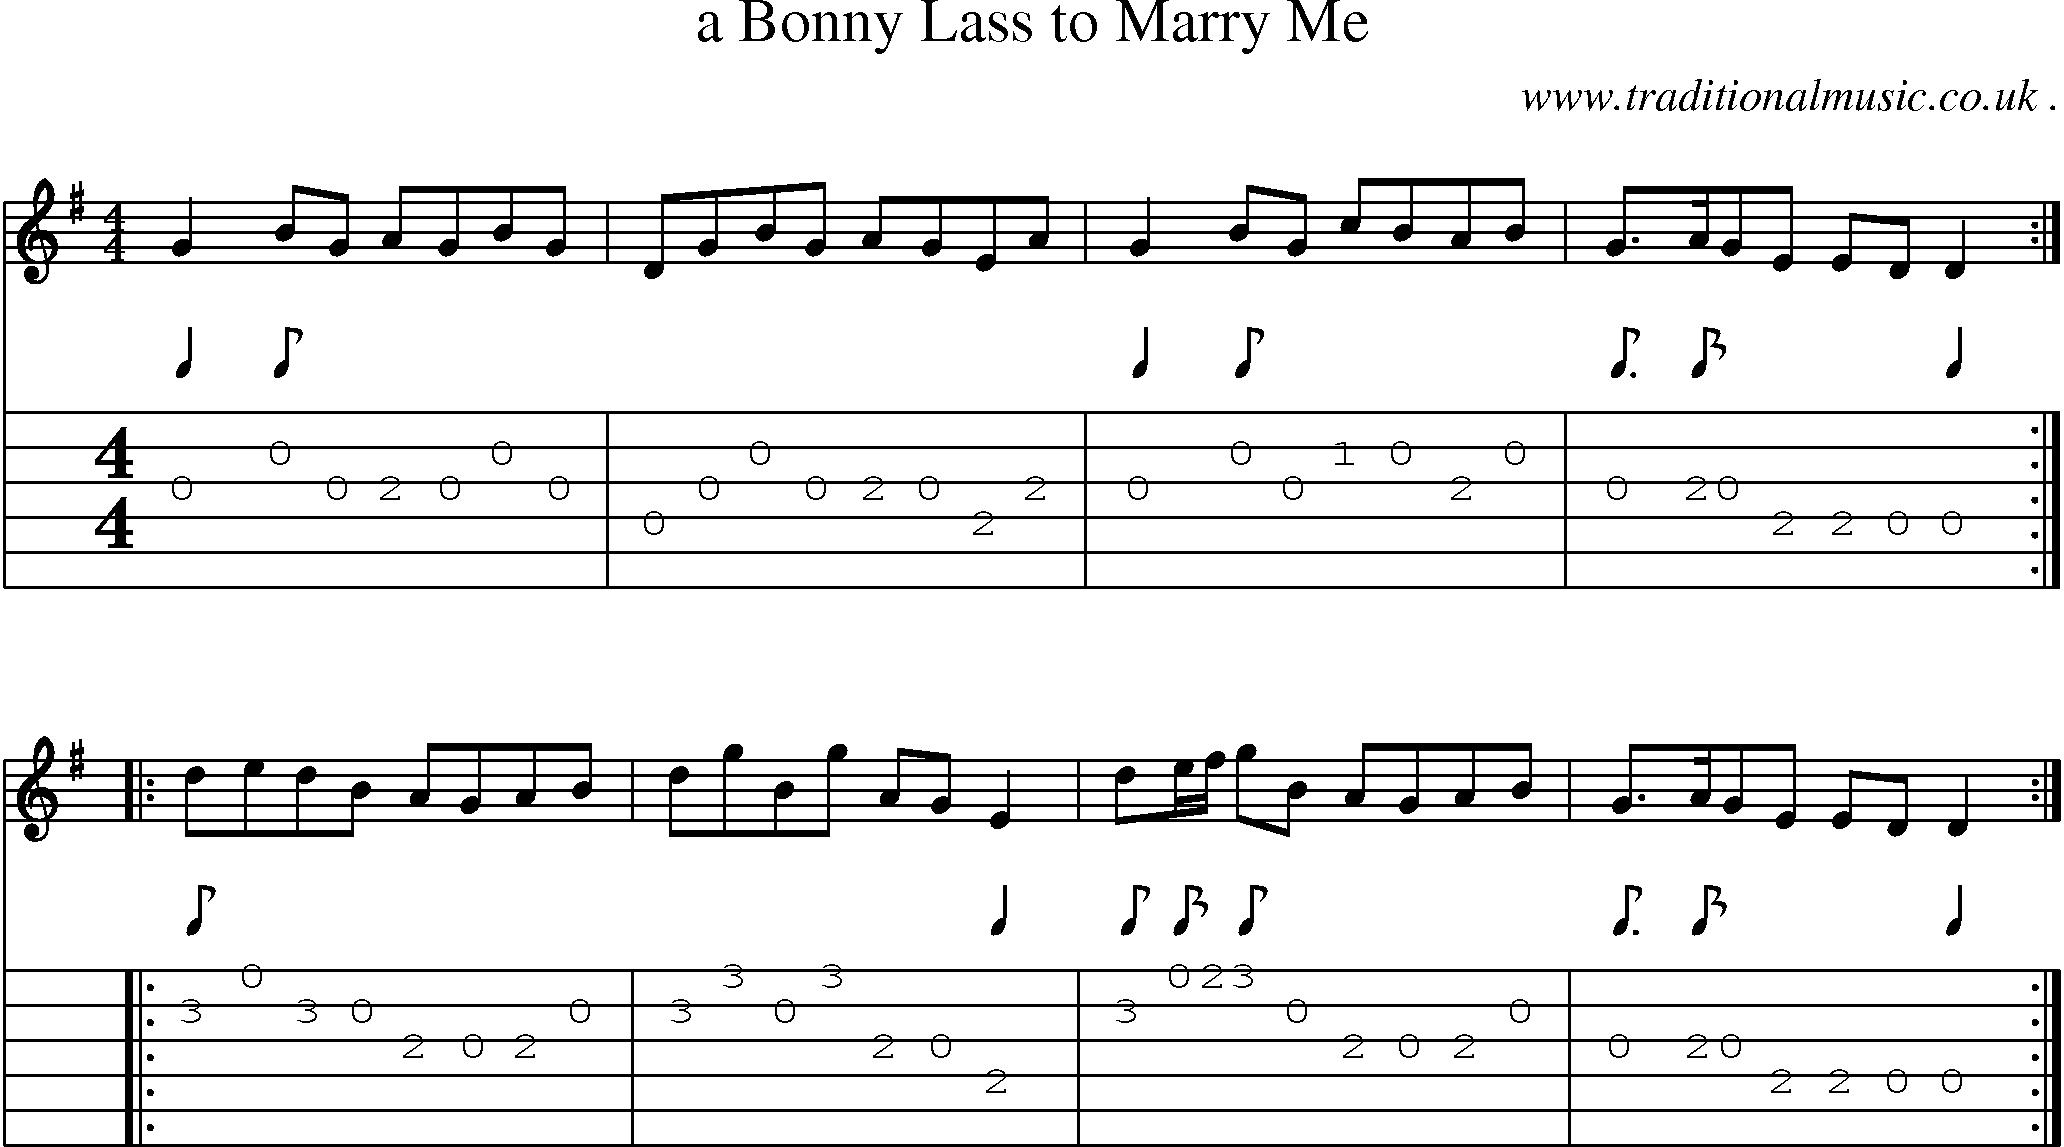 Sheet-music  score, Chords and Guitar Tabs for A Bonny Lass To Marry Me